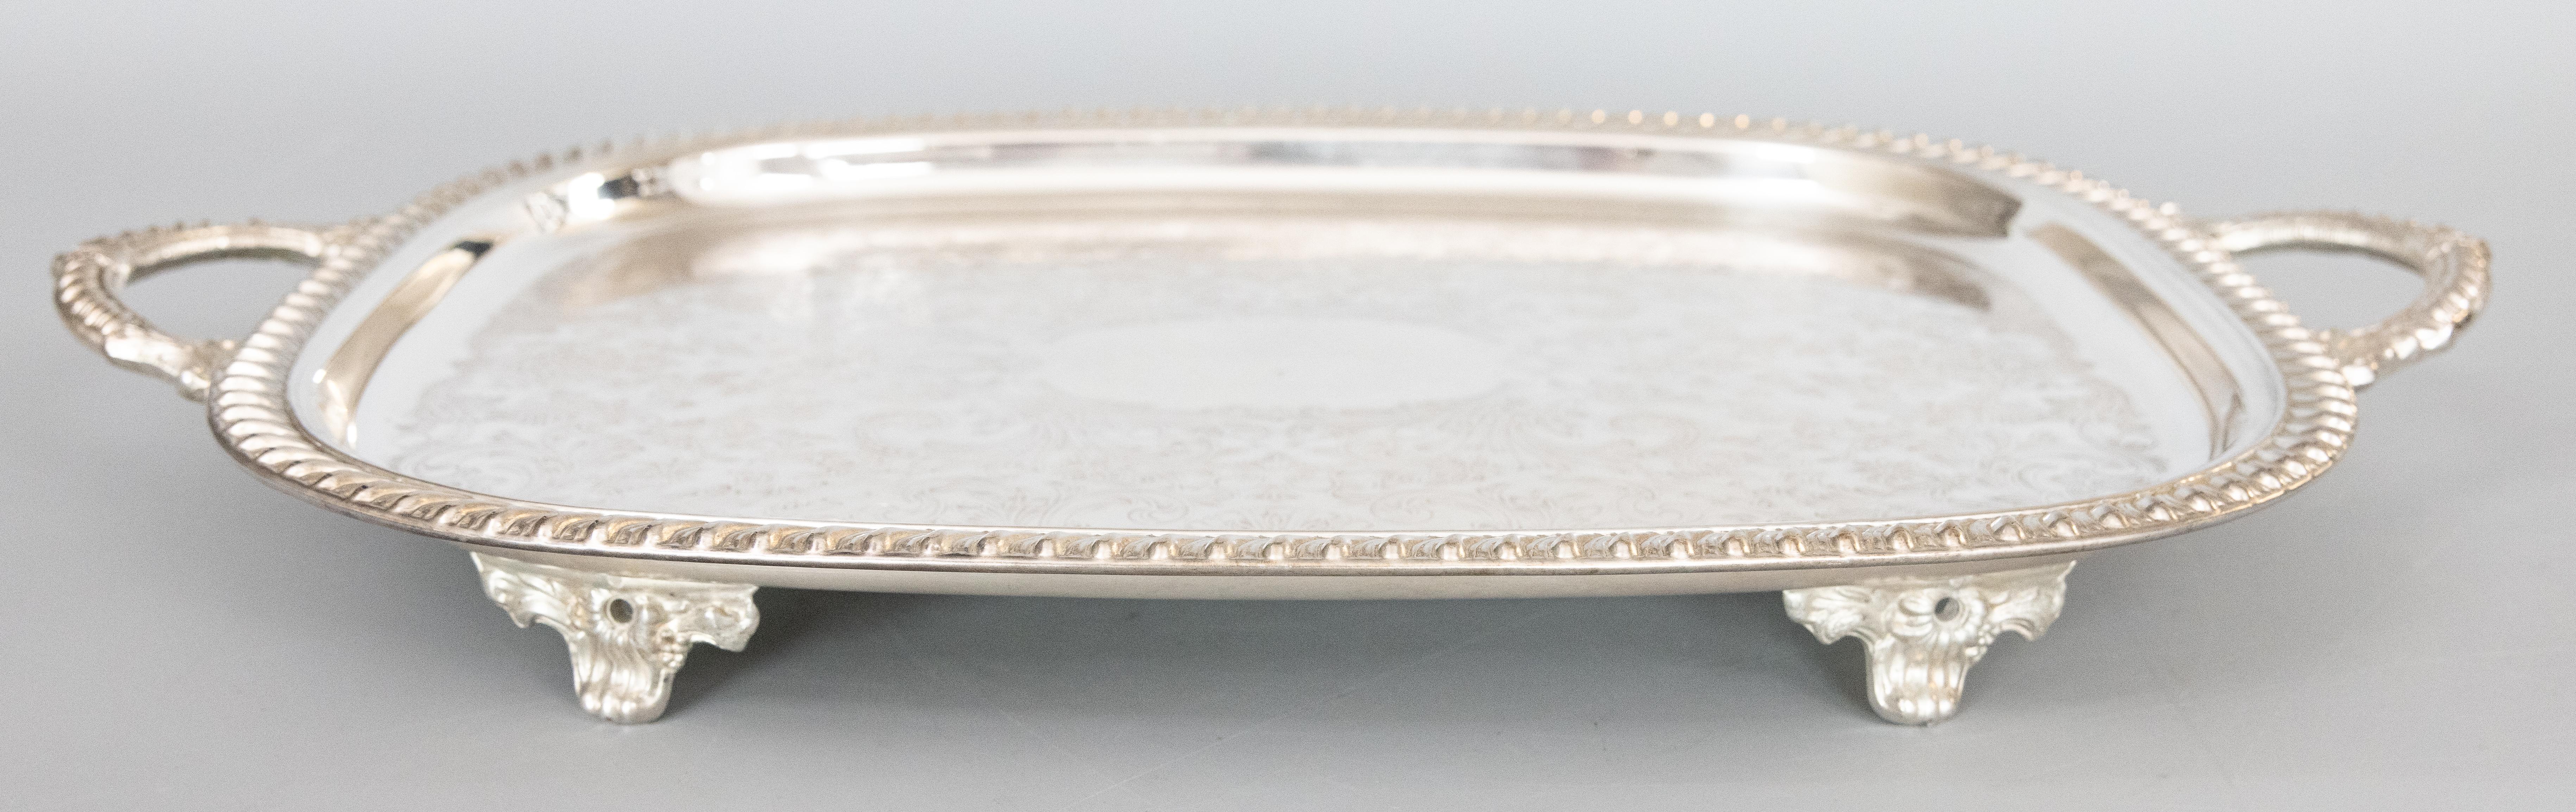 Large Vintage Silver Plate Footed Tray With Handles, circa 1950 For Sale 1